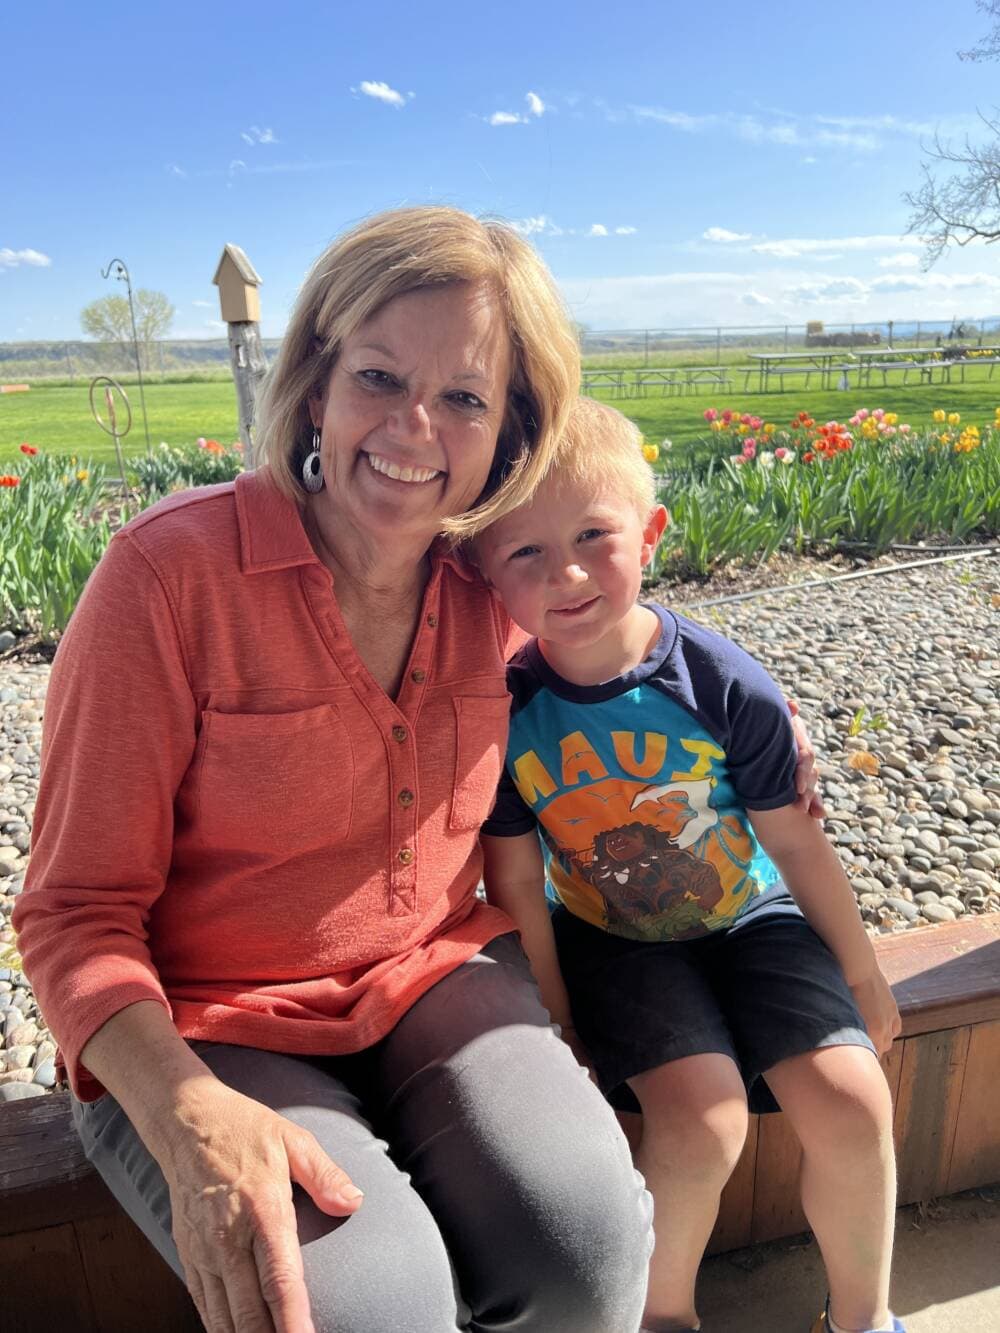 Joanne Kugler and her 5-year-old student, Hayden, in Billings, Montana. (Courtesy of Amber Parish)